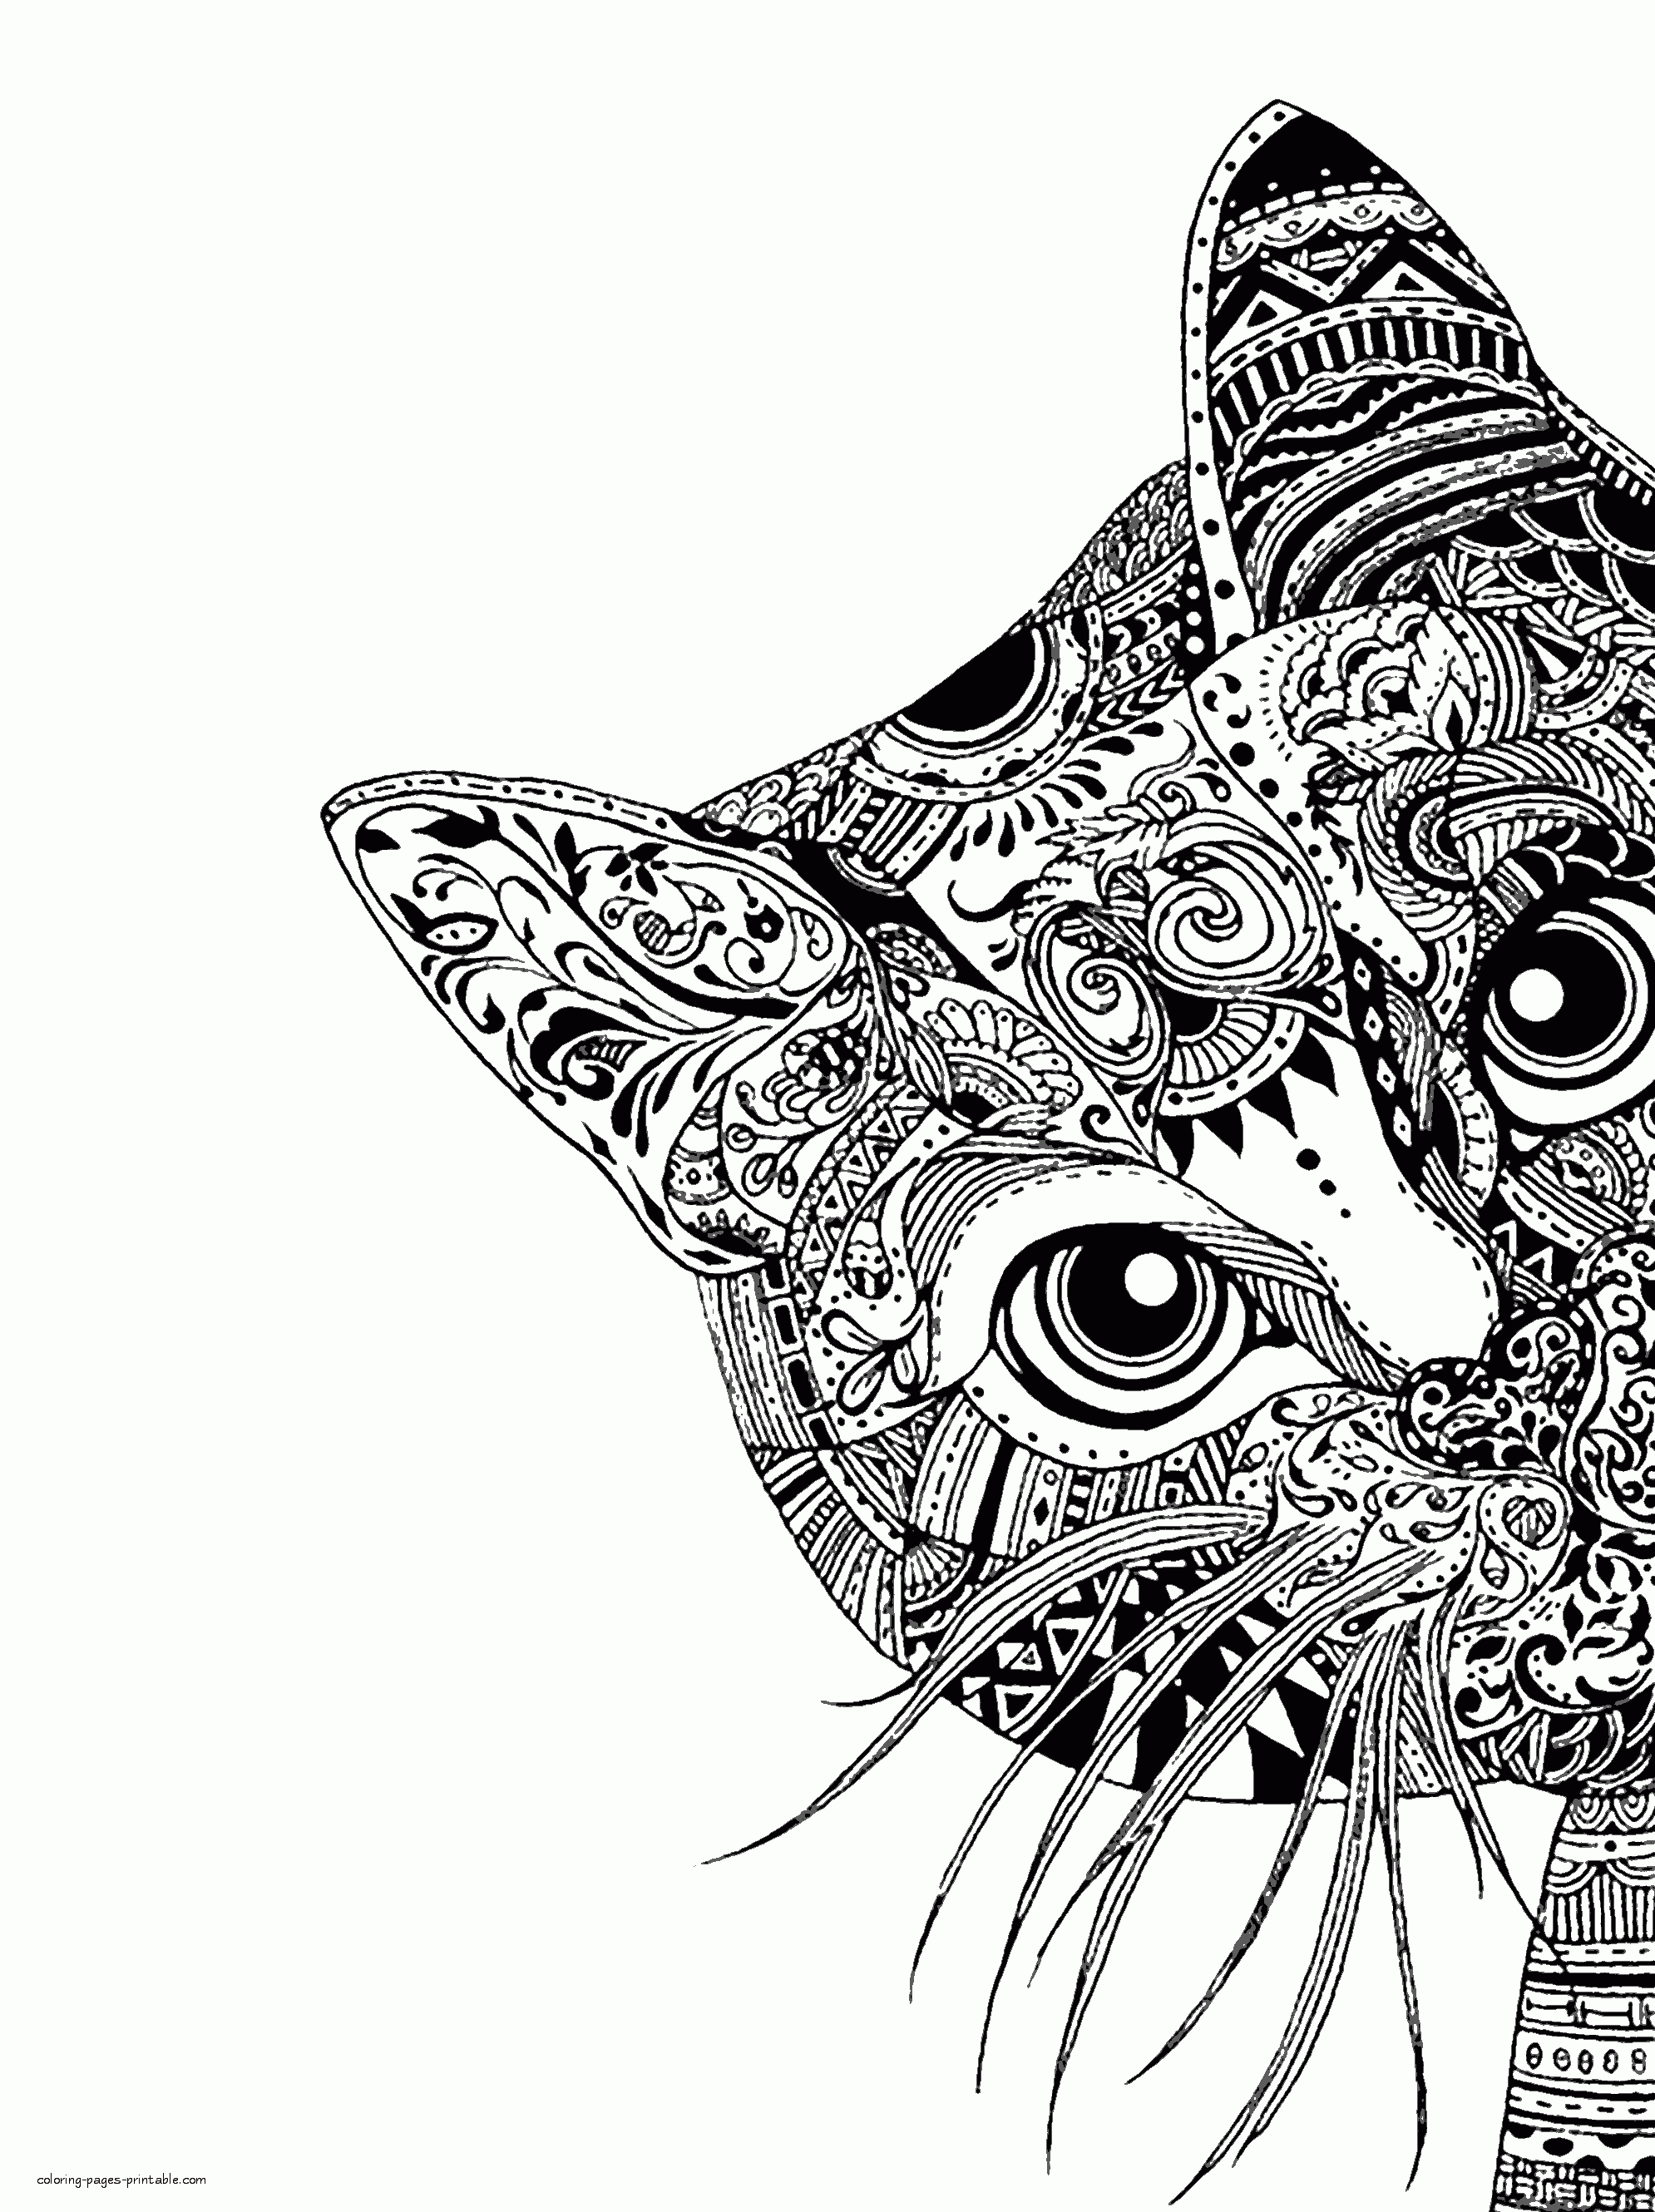 Animal Face Coloring Pages. A Cat |